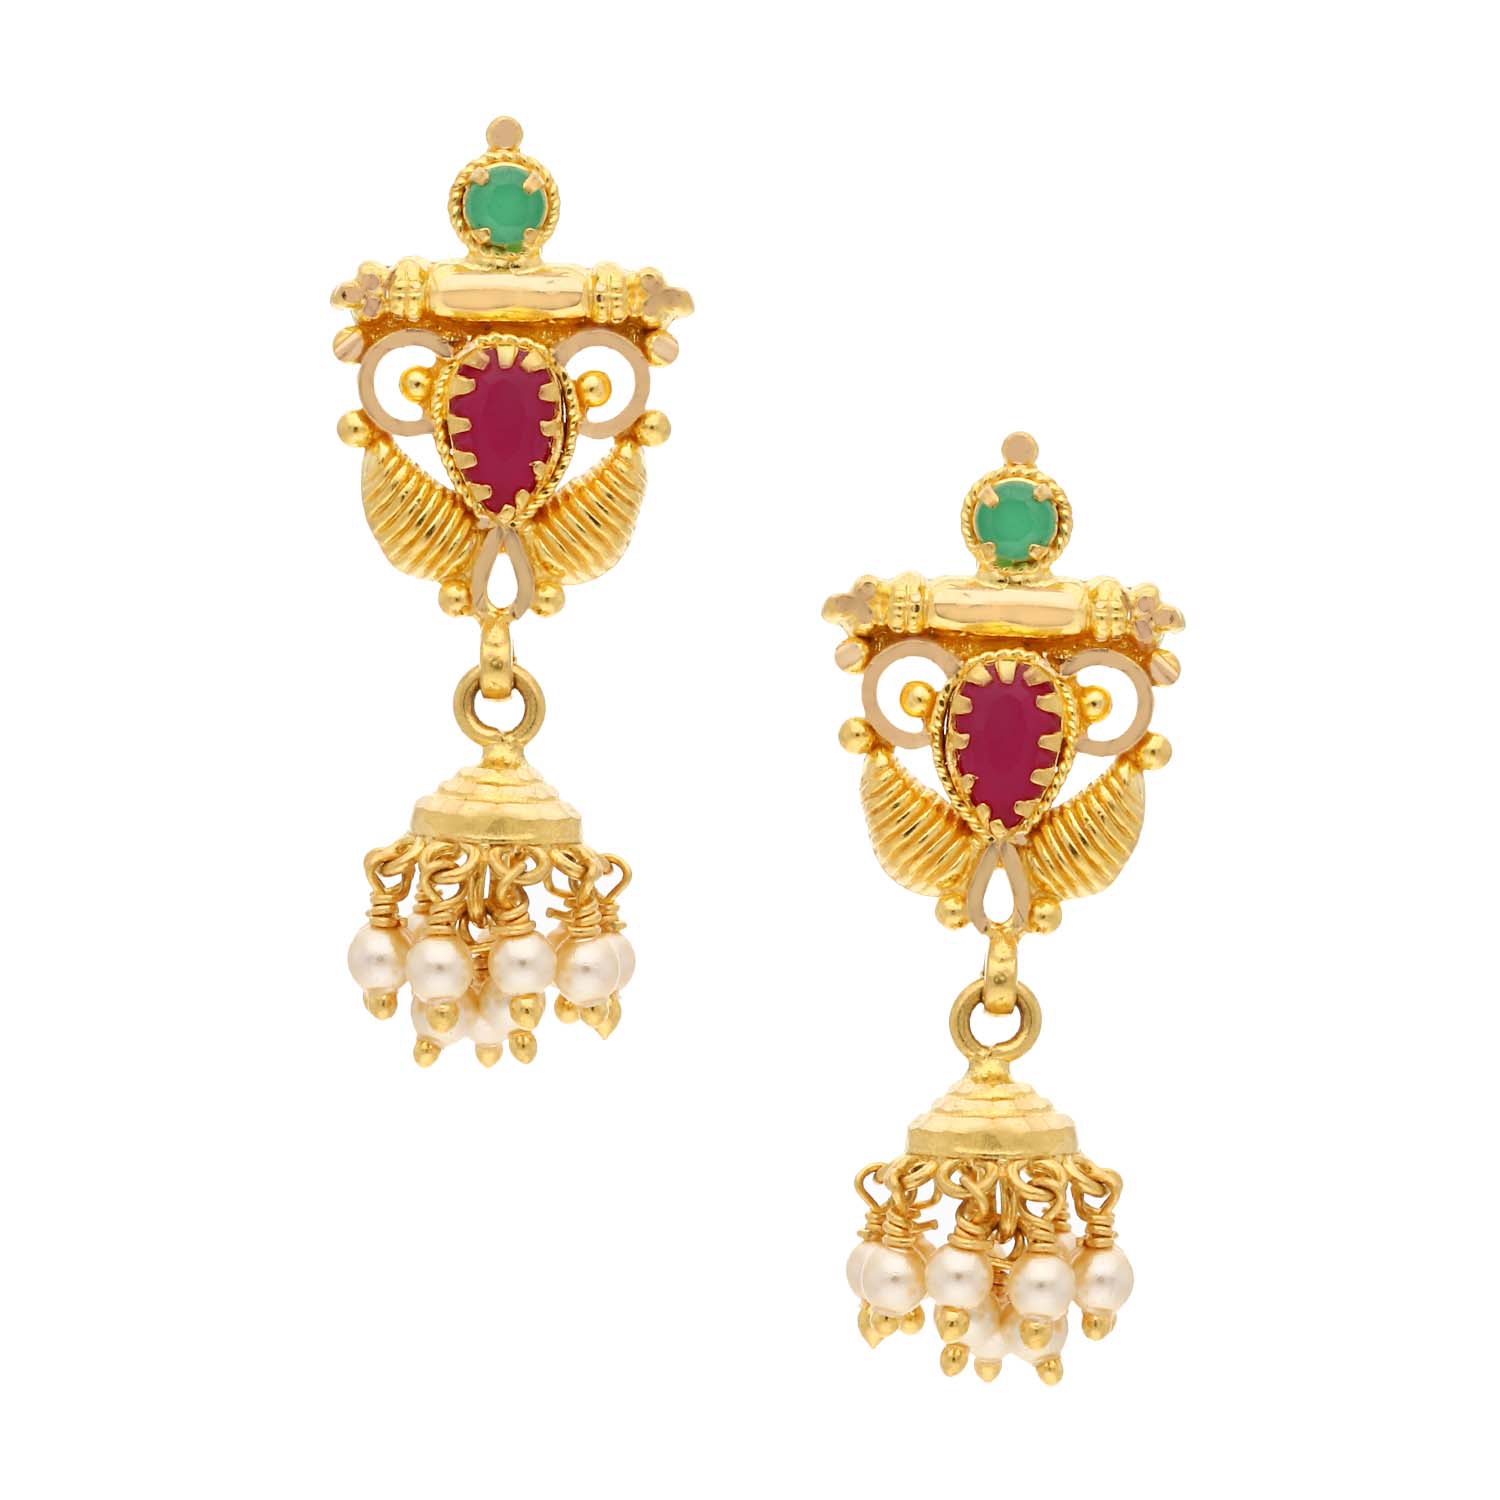 Buy quality Gold plated long necklace with earrings in Ahmedabad